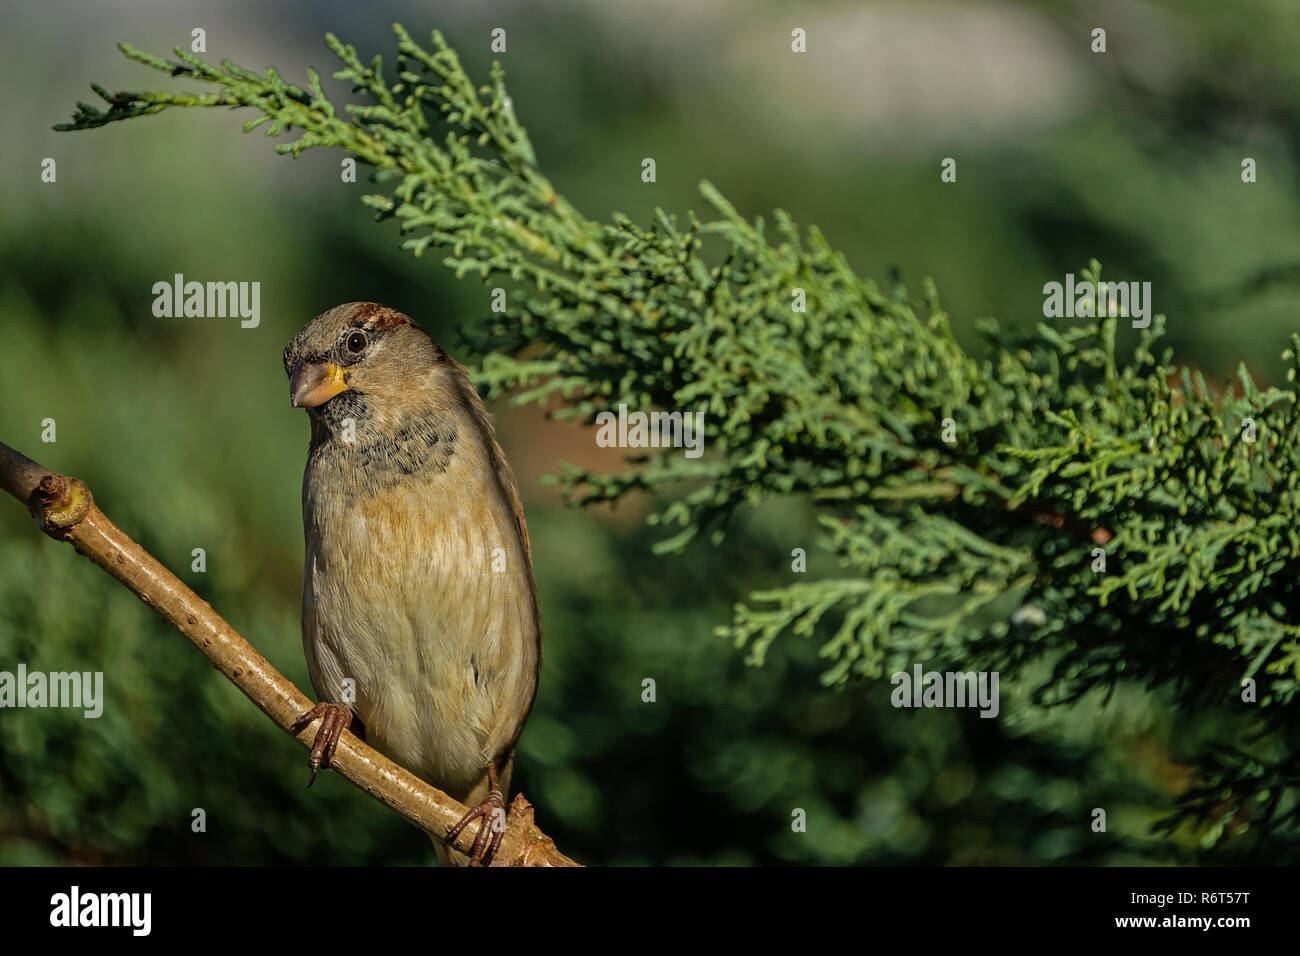 Passer domesticus sitting on a branch Stock Photo